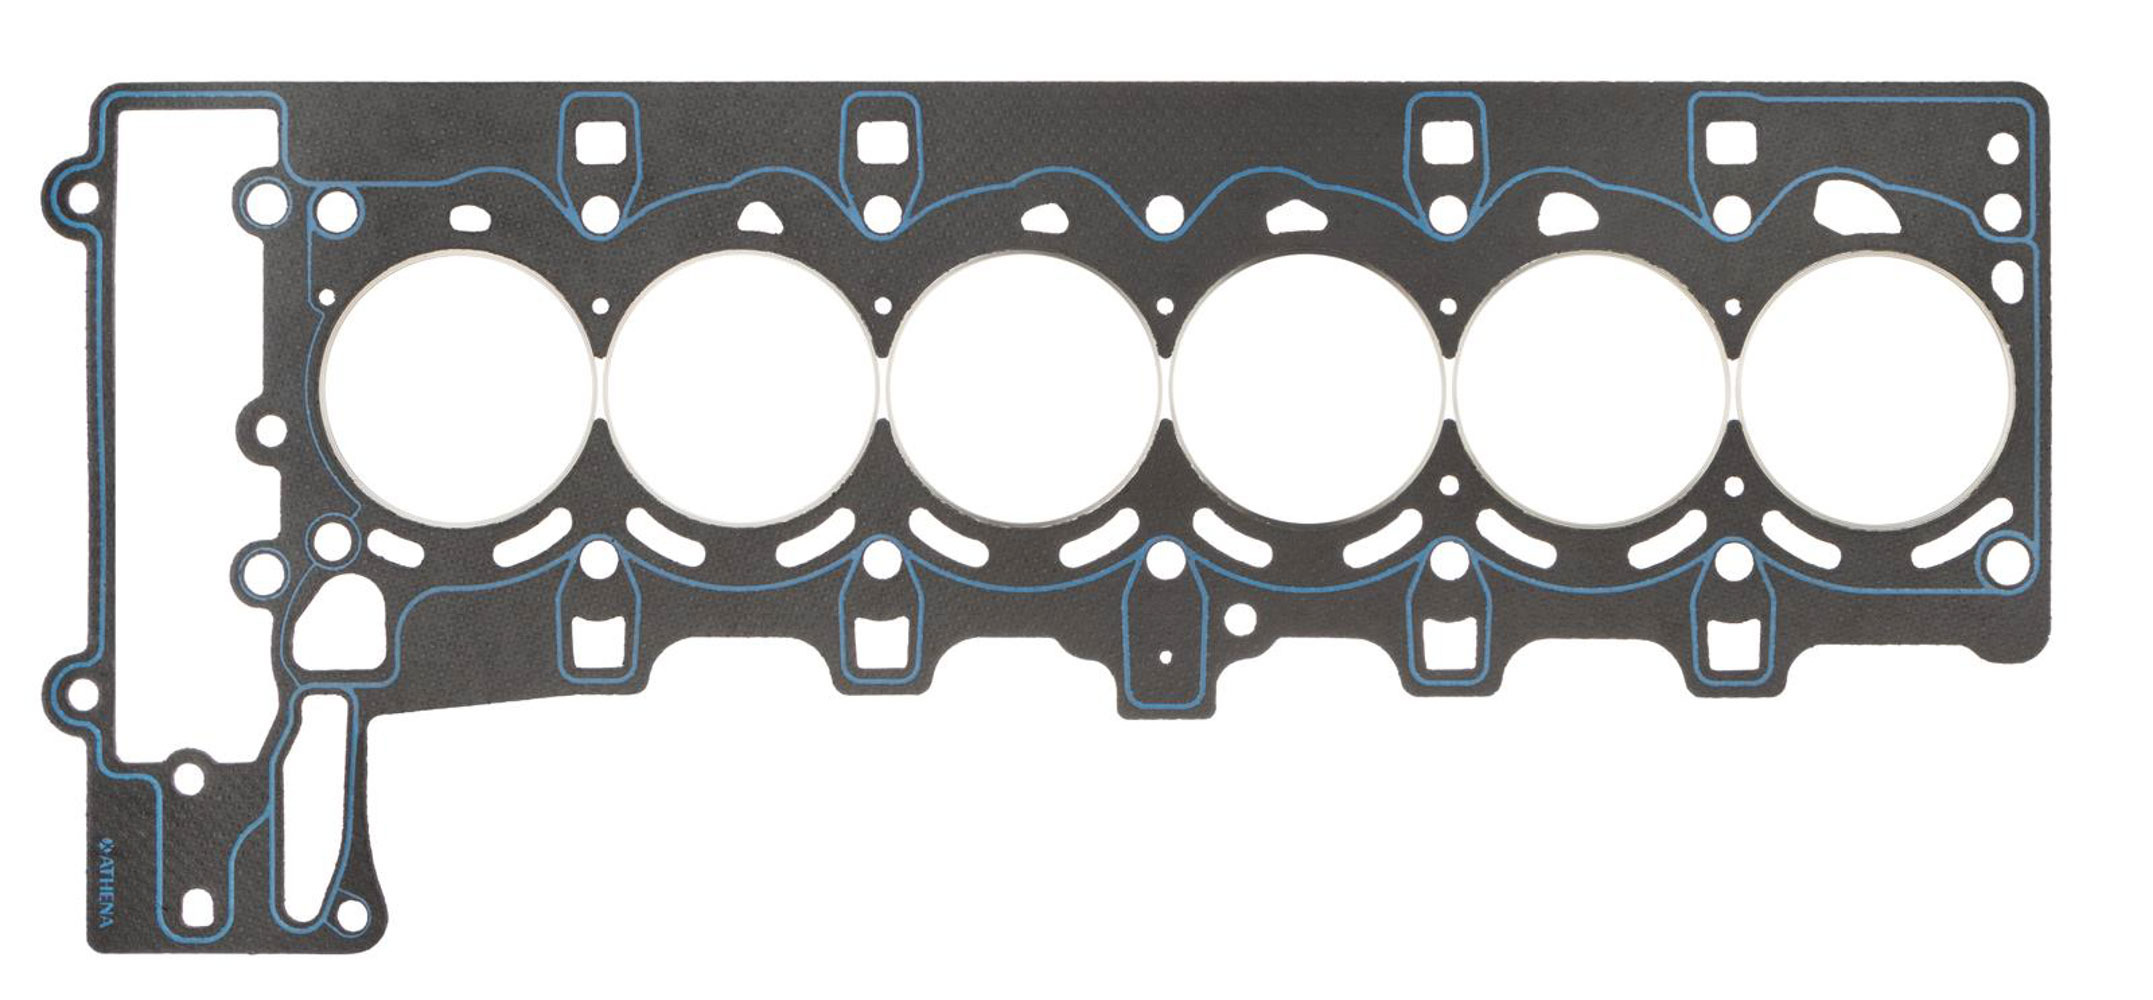 SCE Gaskets CR330074 - Cylinder Head Gasket, Vulcan Cut Ring, 86.00 mm Bore, 1.50 mm Compression Thickness, Steel Core Laminate, BMW 6-Cylinder, Each